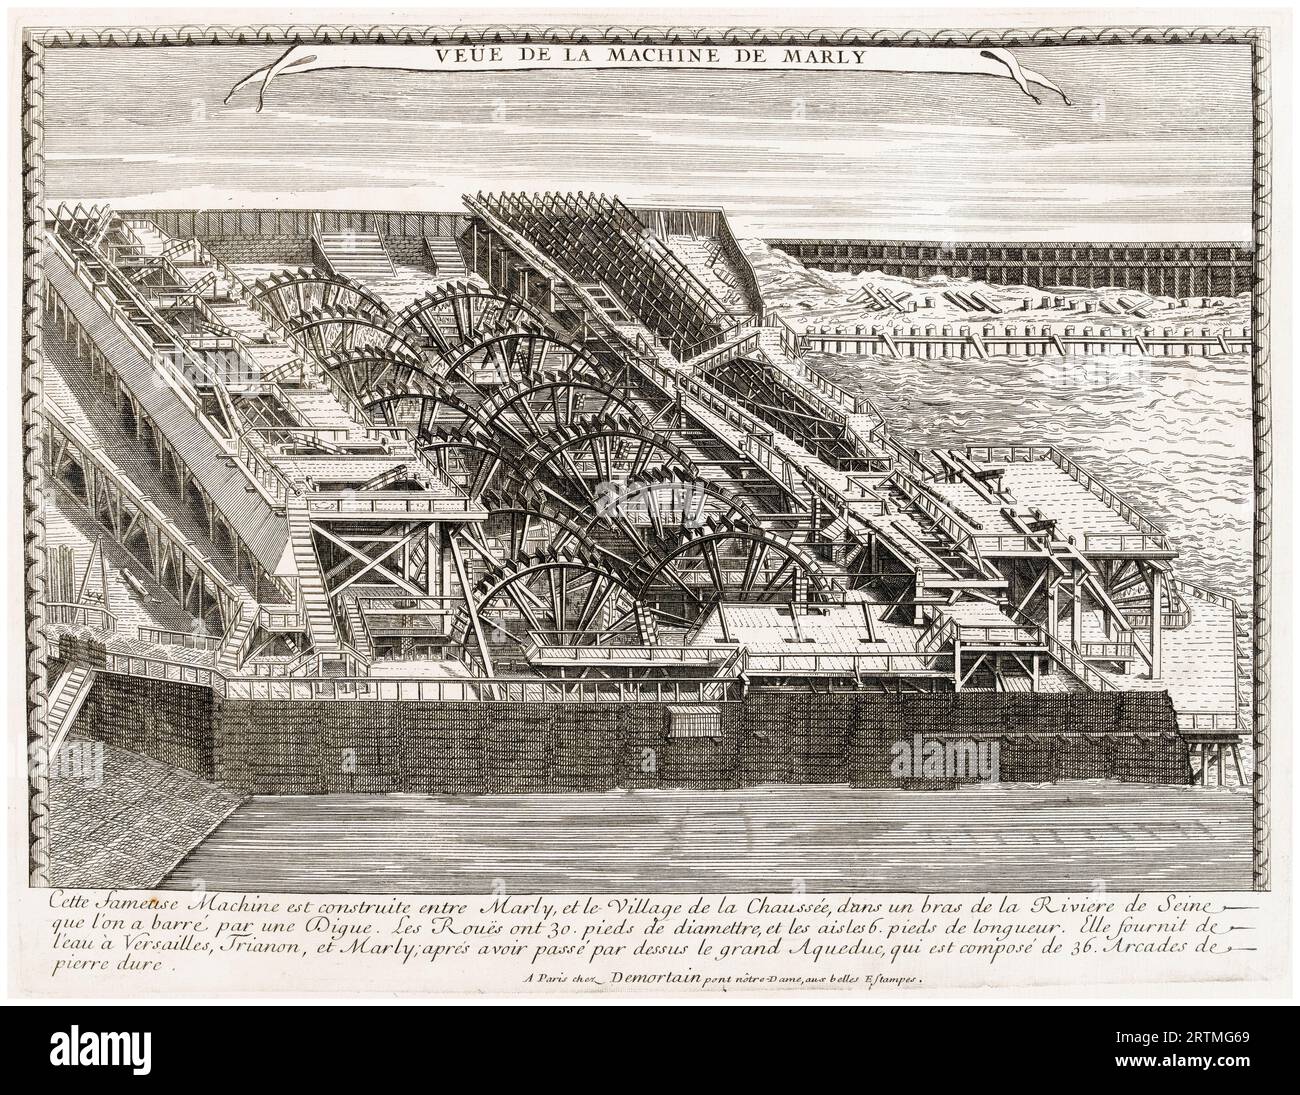 View of the Machine of Marly, etching, 1714-1715 Stock Photo